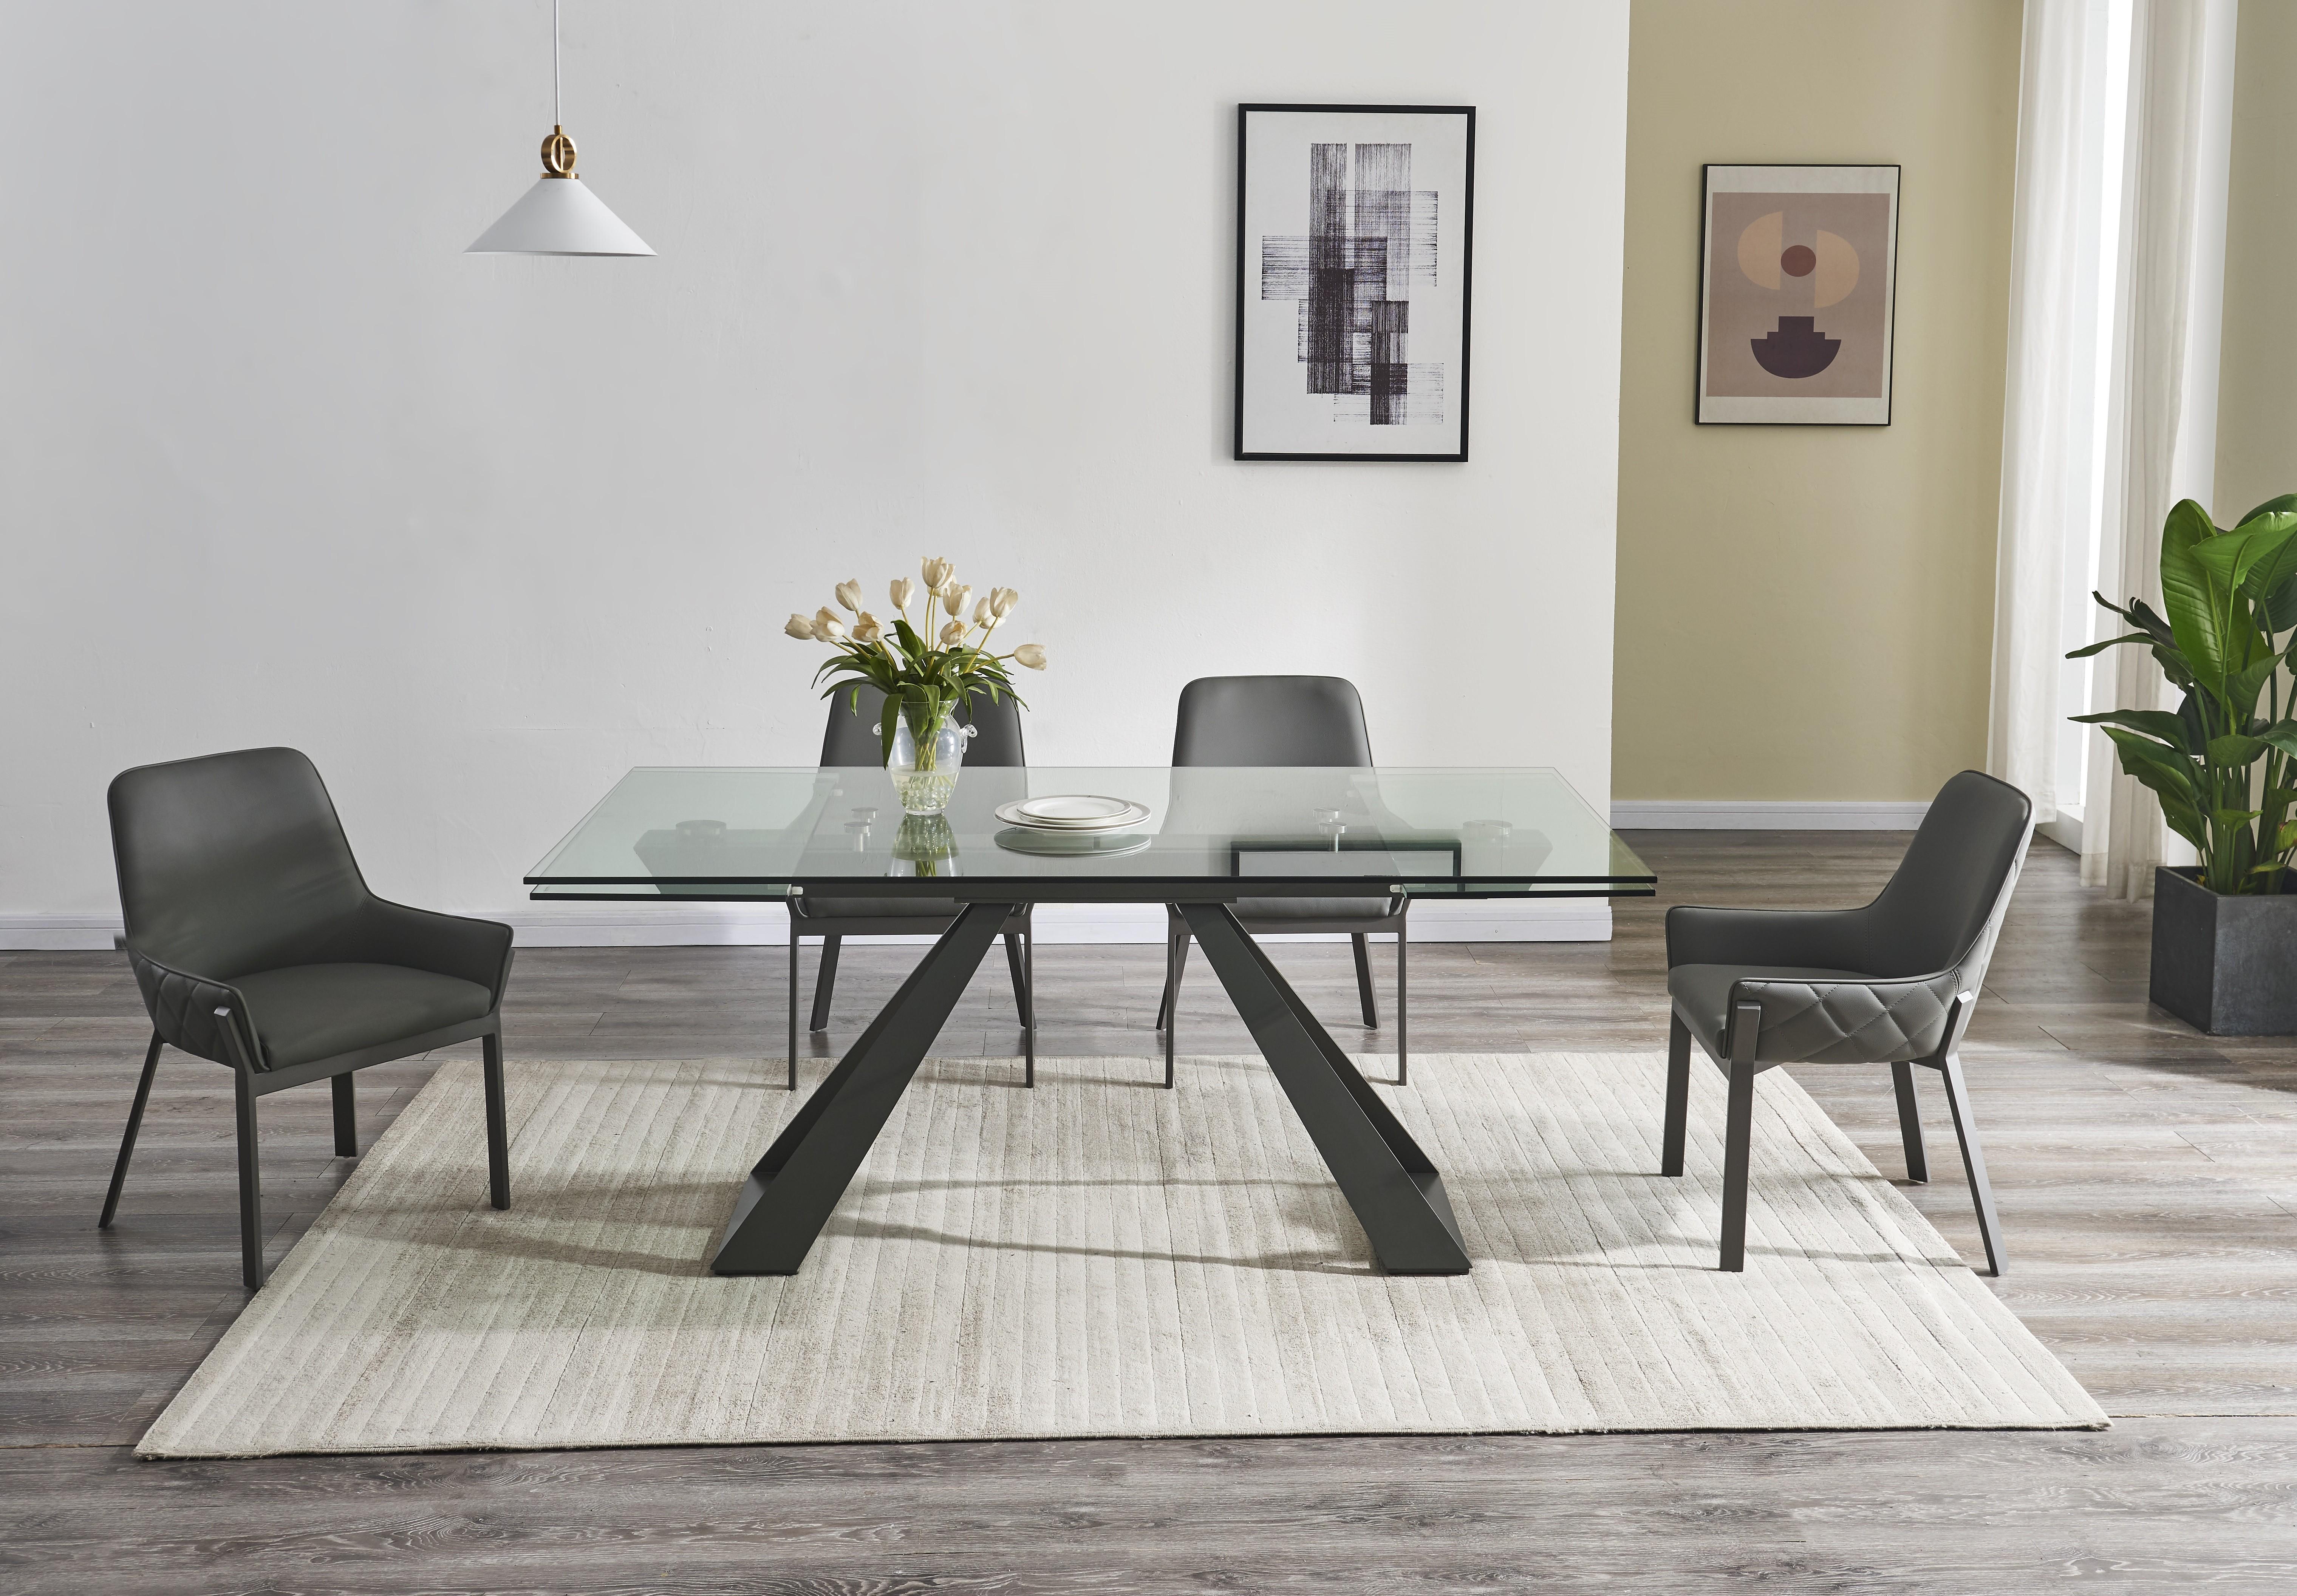 Contemporary, Modern Dining Room Set San Diego Venice 17255-9pcs in Gunmetal, Clear, Gray Leather